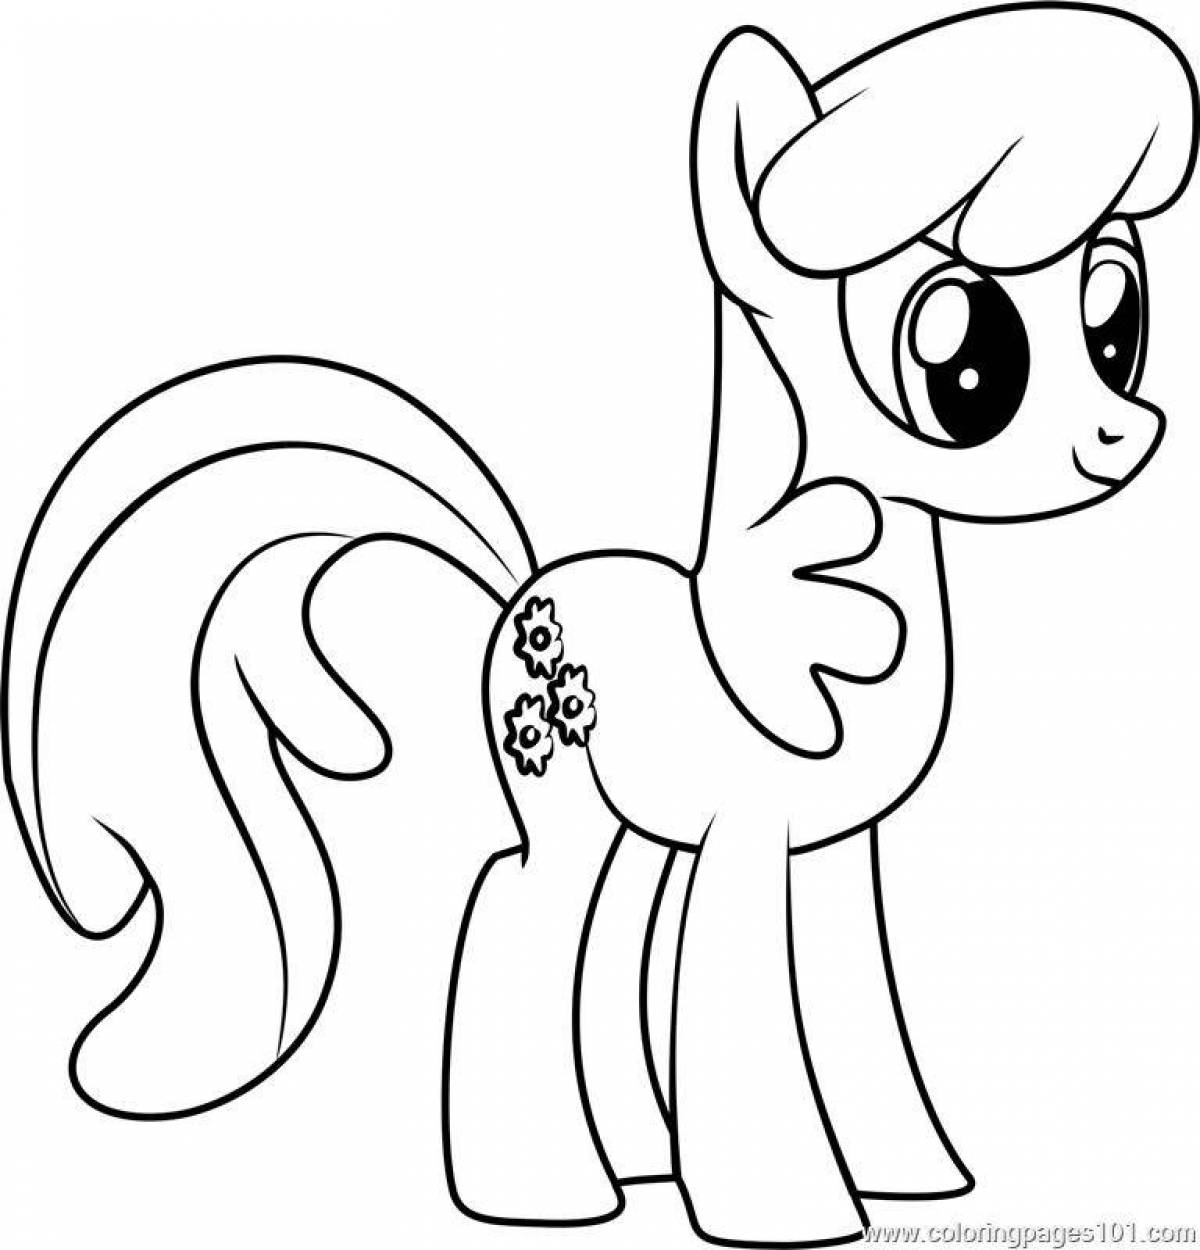 Coloring book the freaky life of a pony